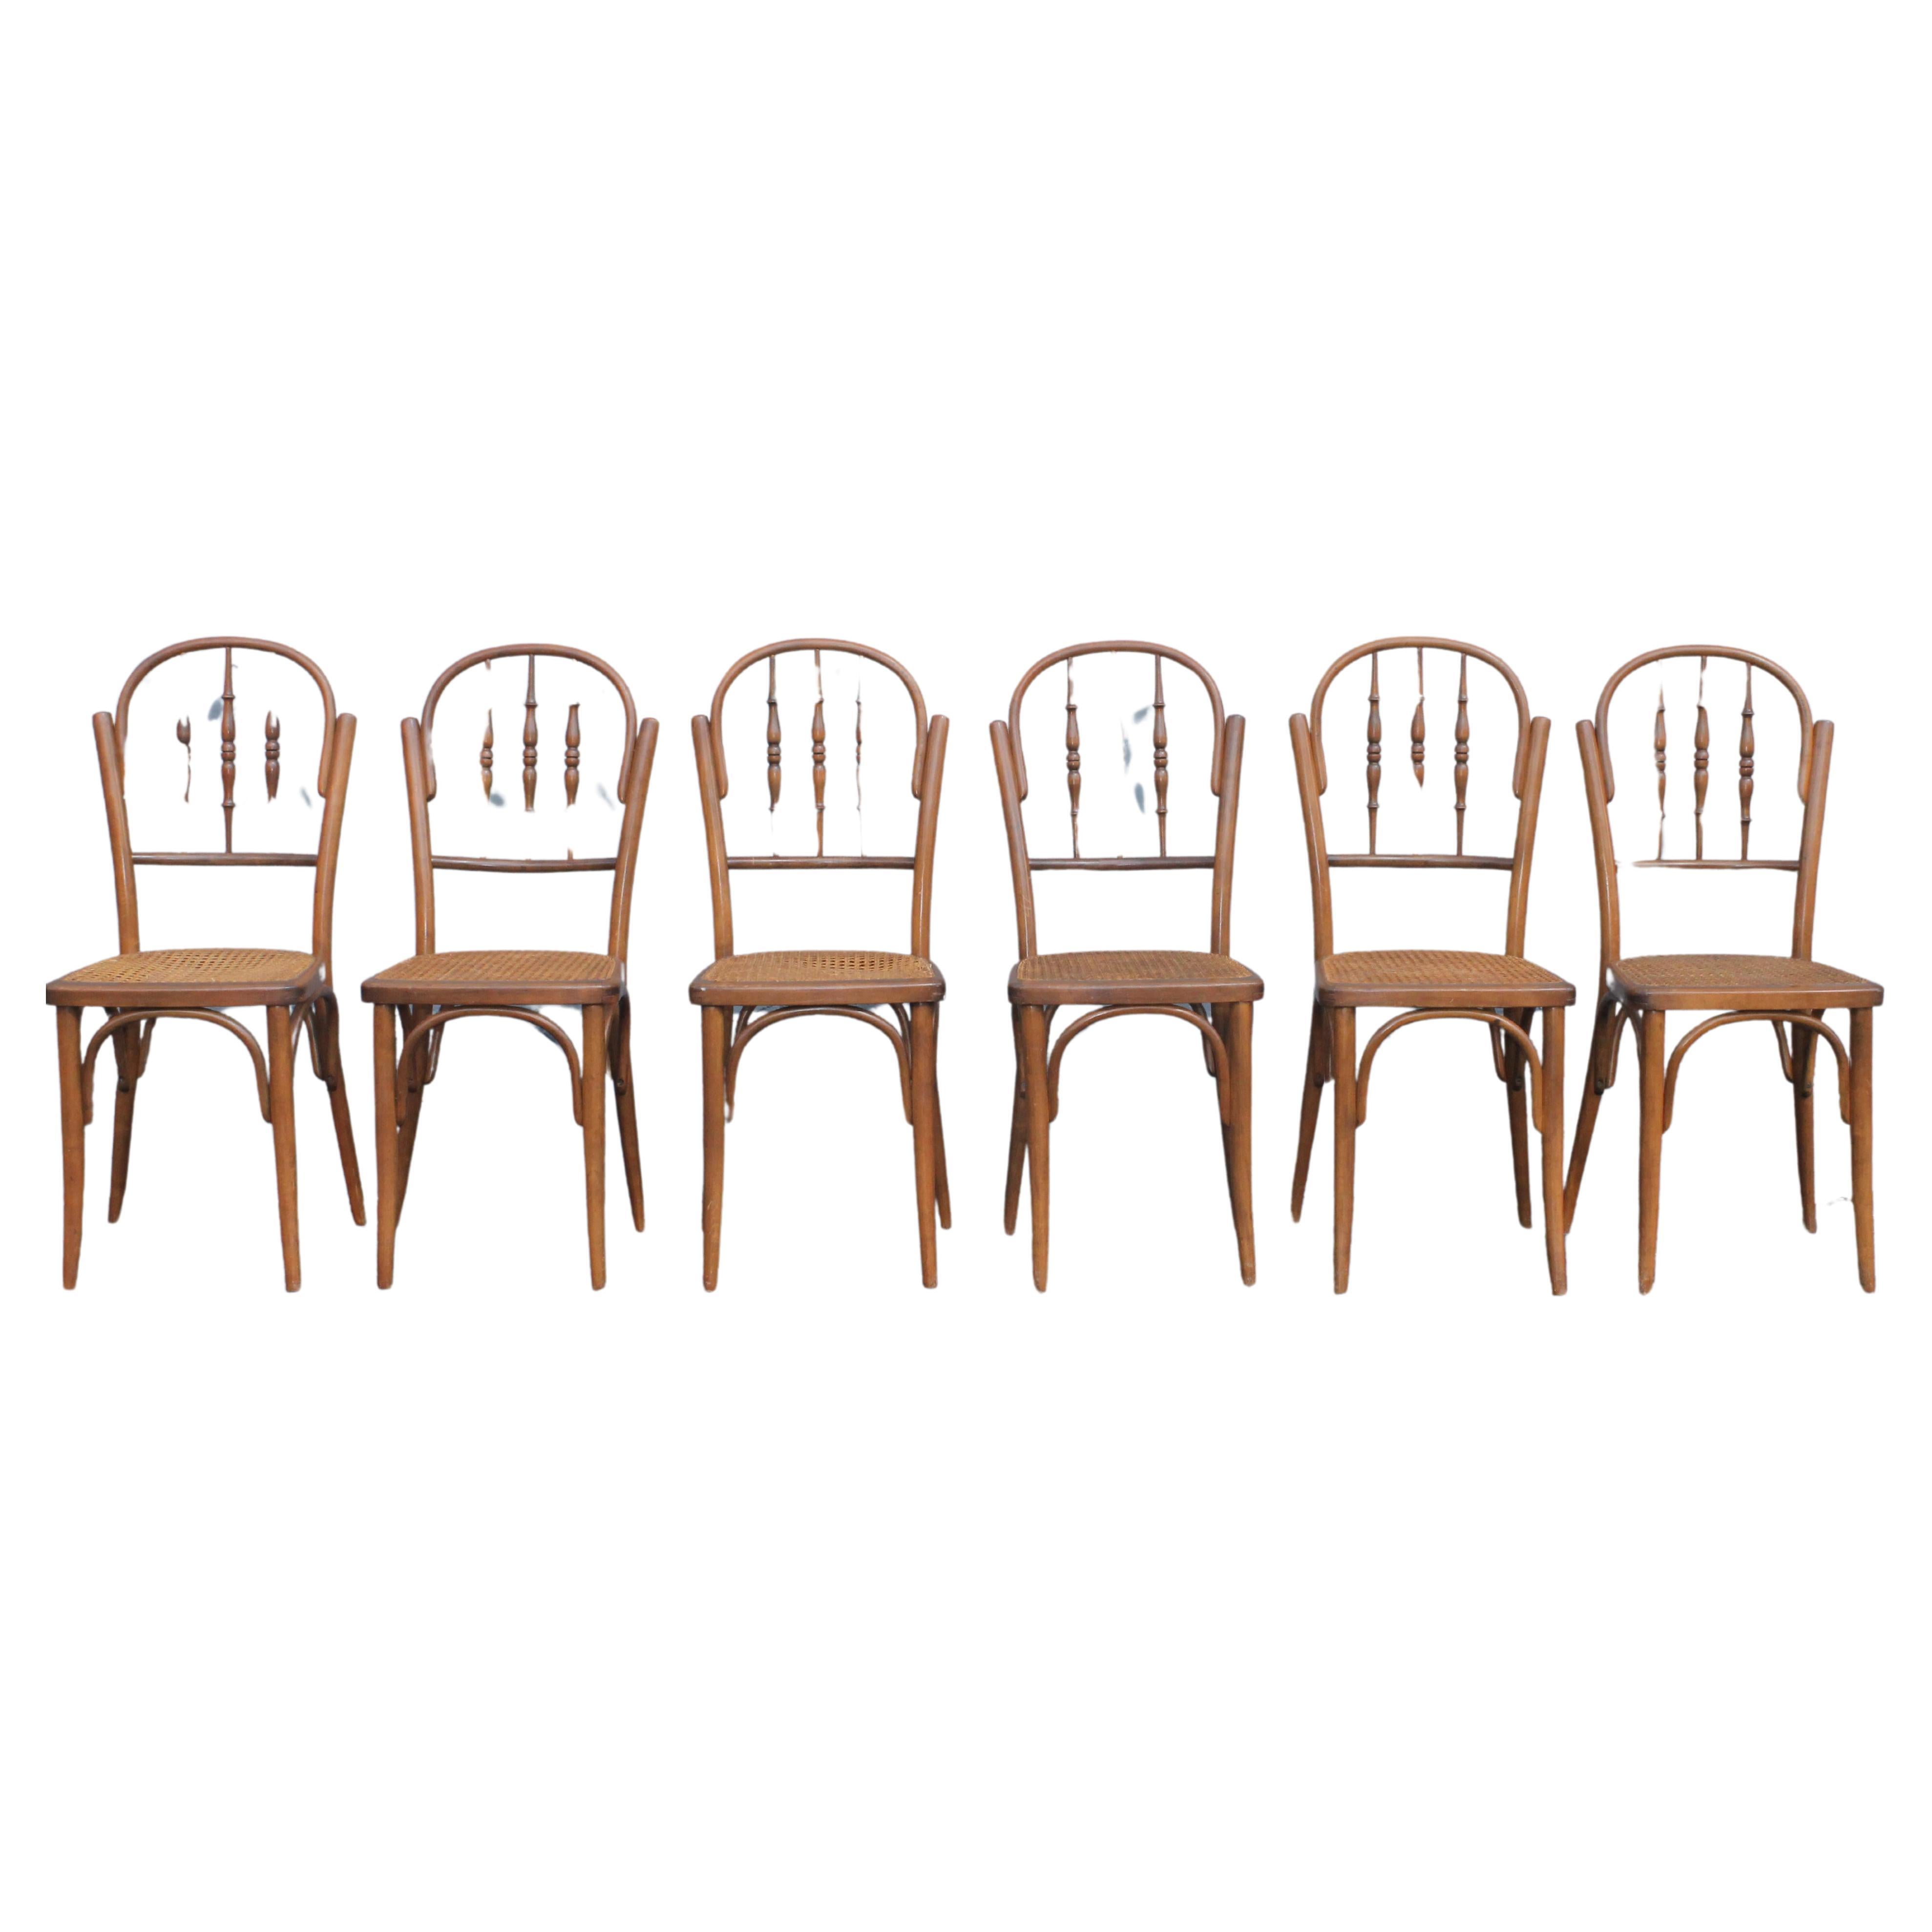 c1940's Set of 6 French Country Style Caned Dining Chairs